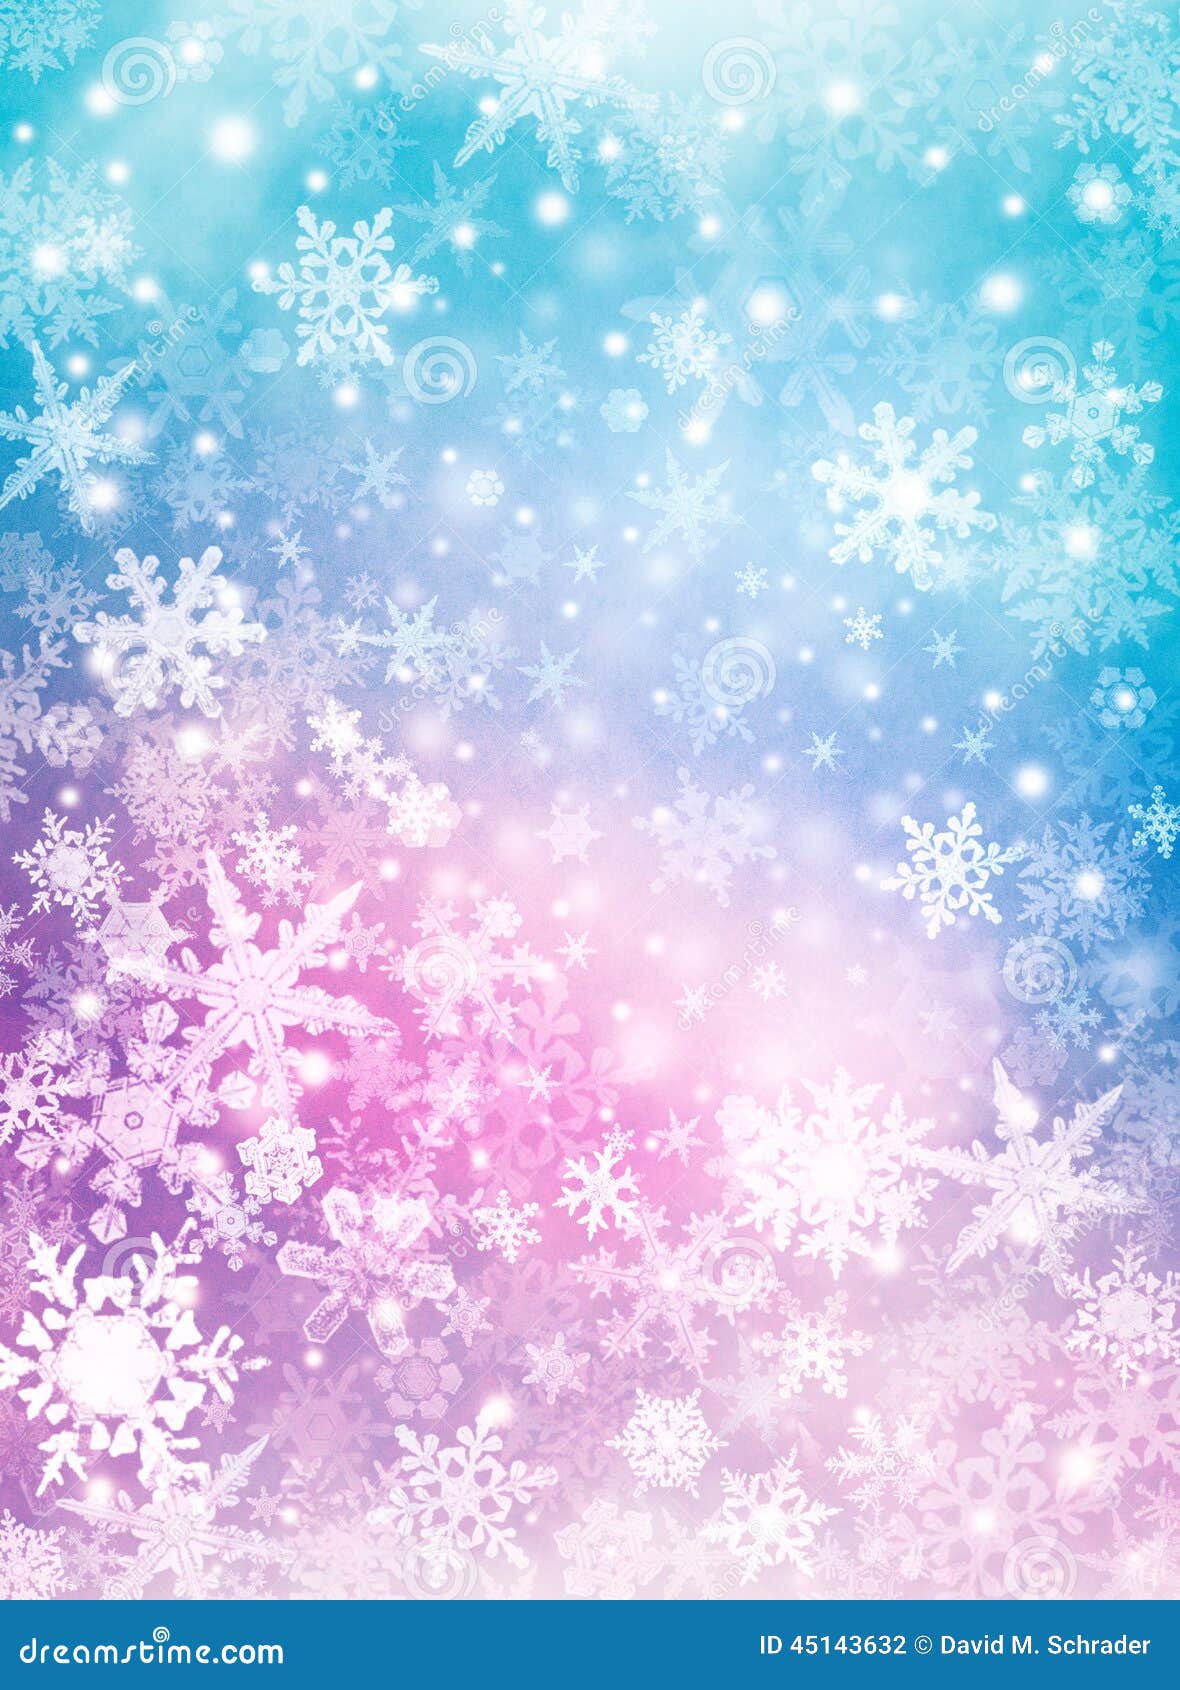 Colorful Snow Background stock illustration. Image of defocused - 45143632